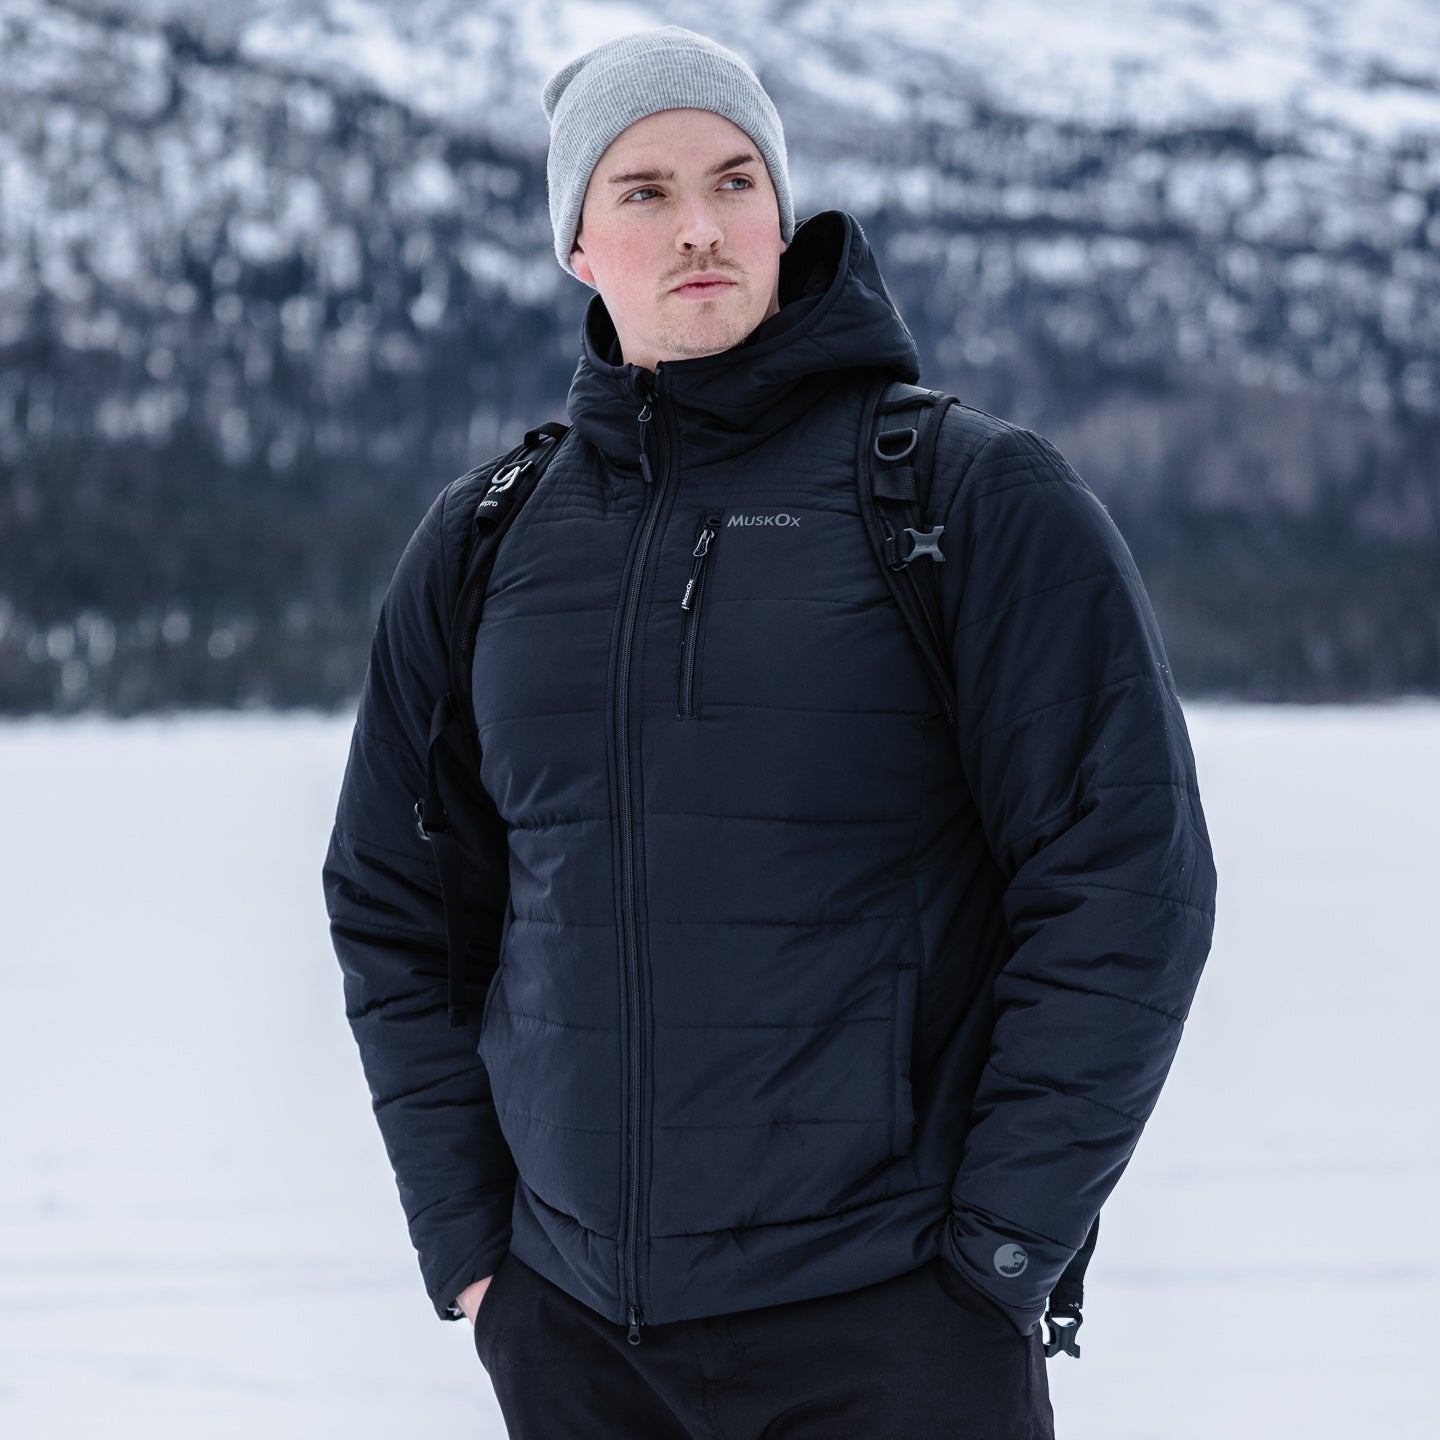 Photo taken by NickByNorthwest. MuskOx Insulated Wrangell Puffer Jacket. Performance Men's Outerwear by MuskOx Men's Outdoor Apparel. Lab Certified Insulated Jacket to keep you warm in negative conditions.